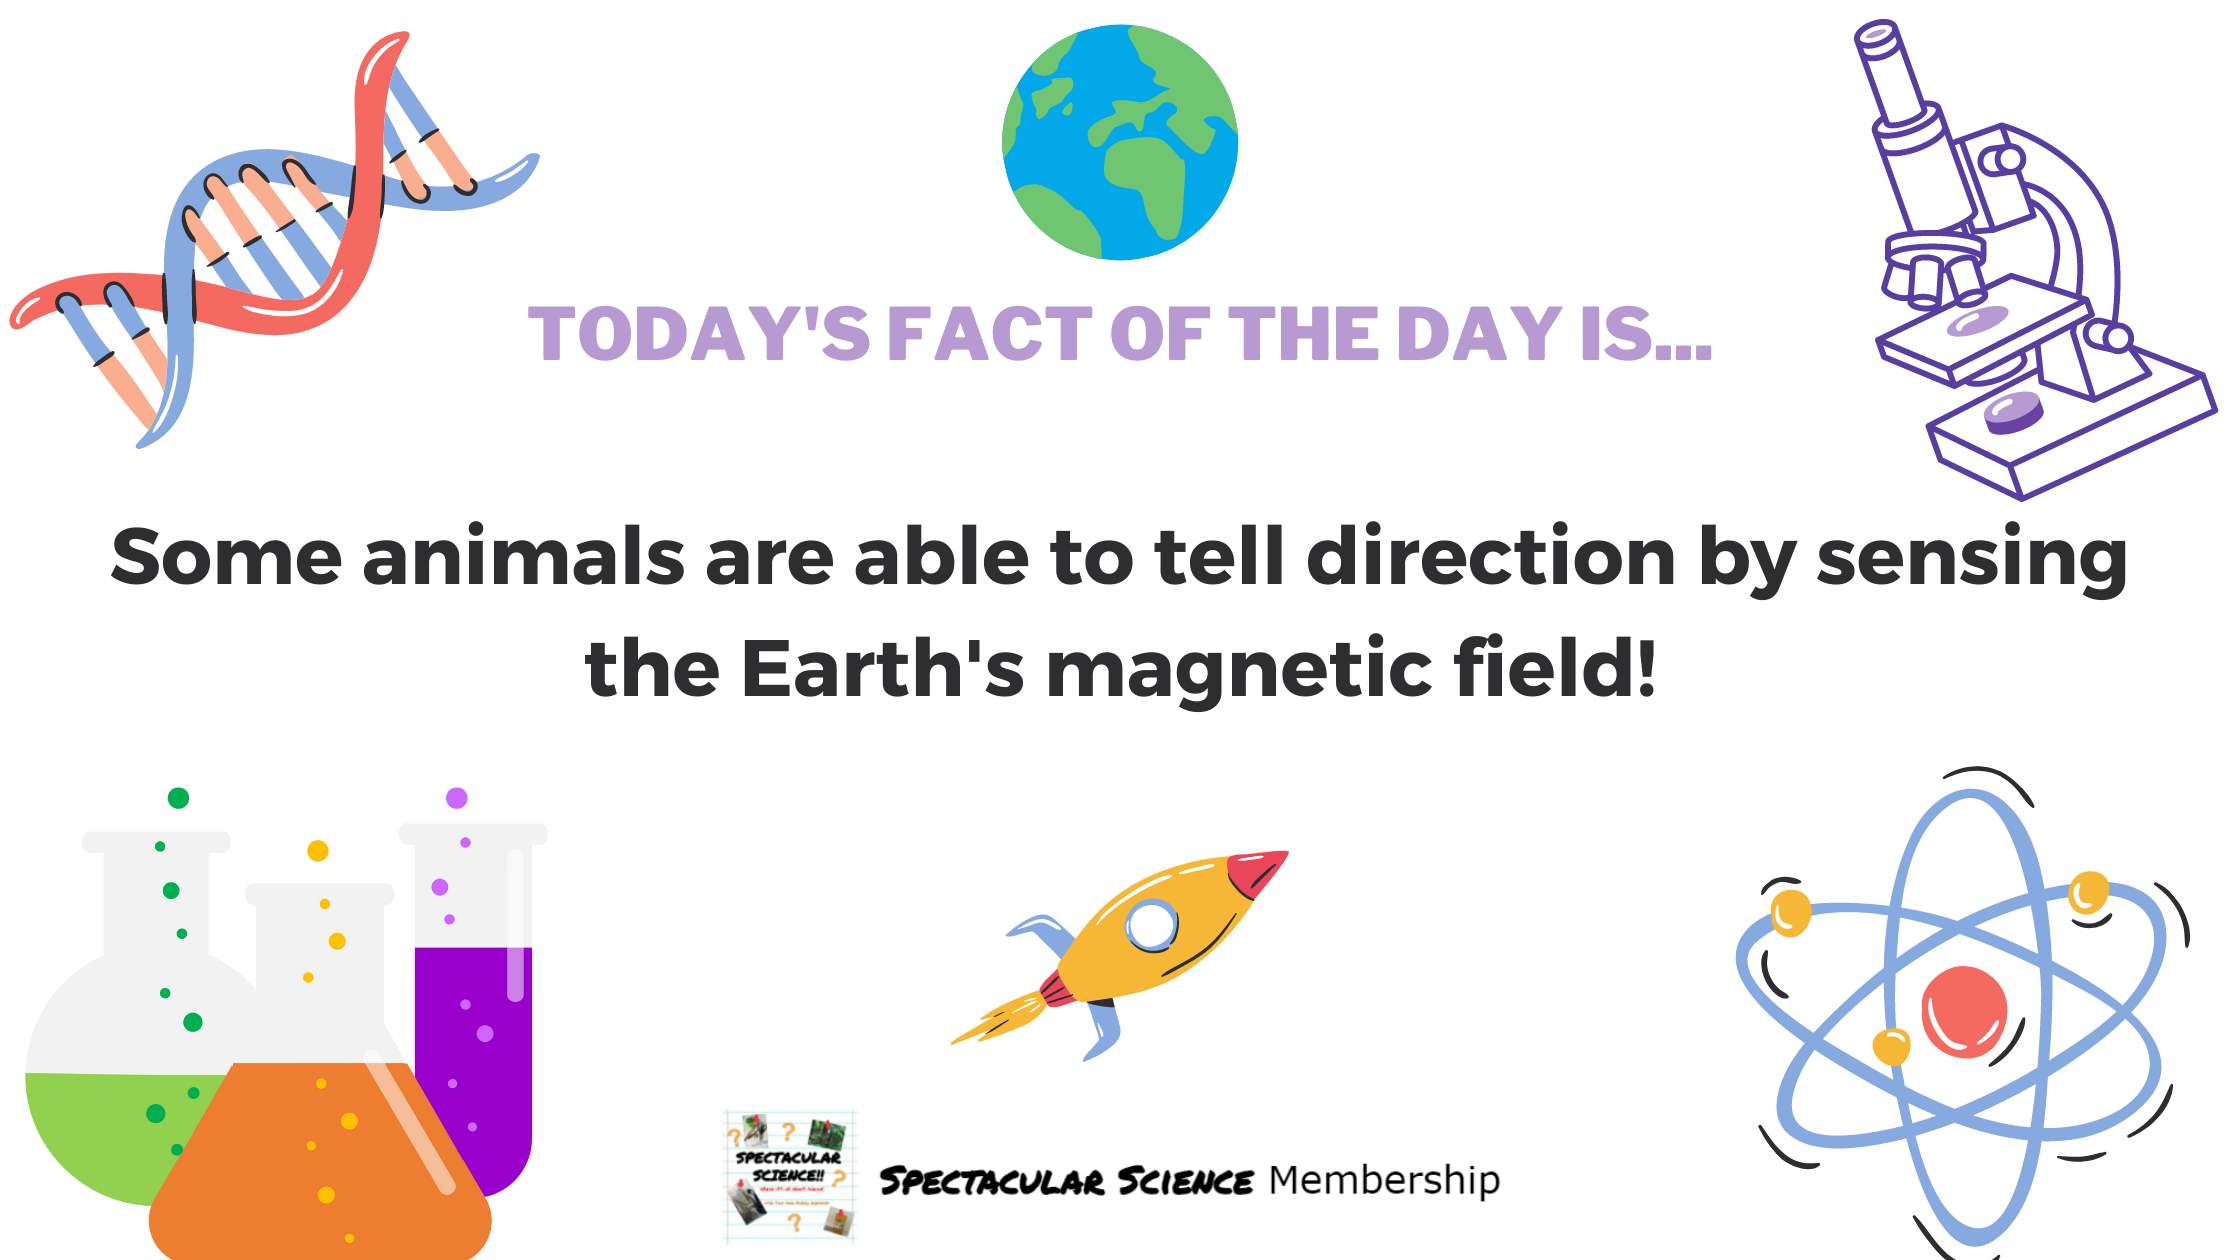 Fact of the Day Image Feb. 22nd